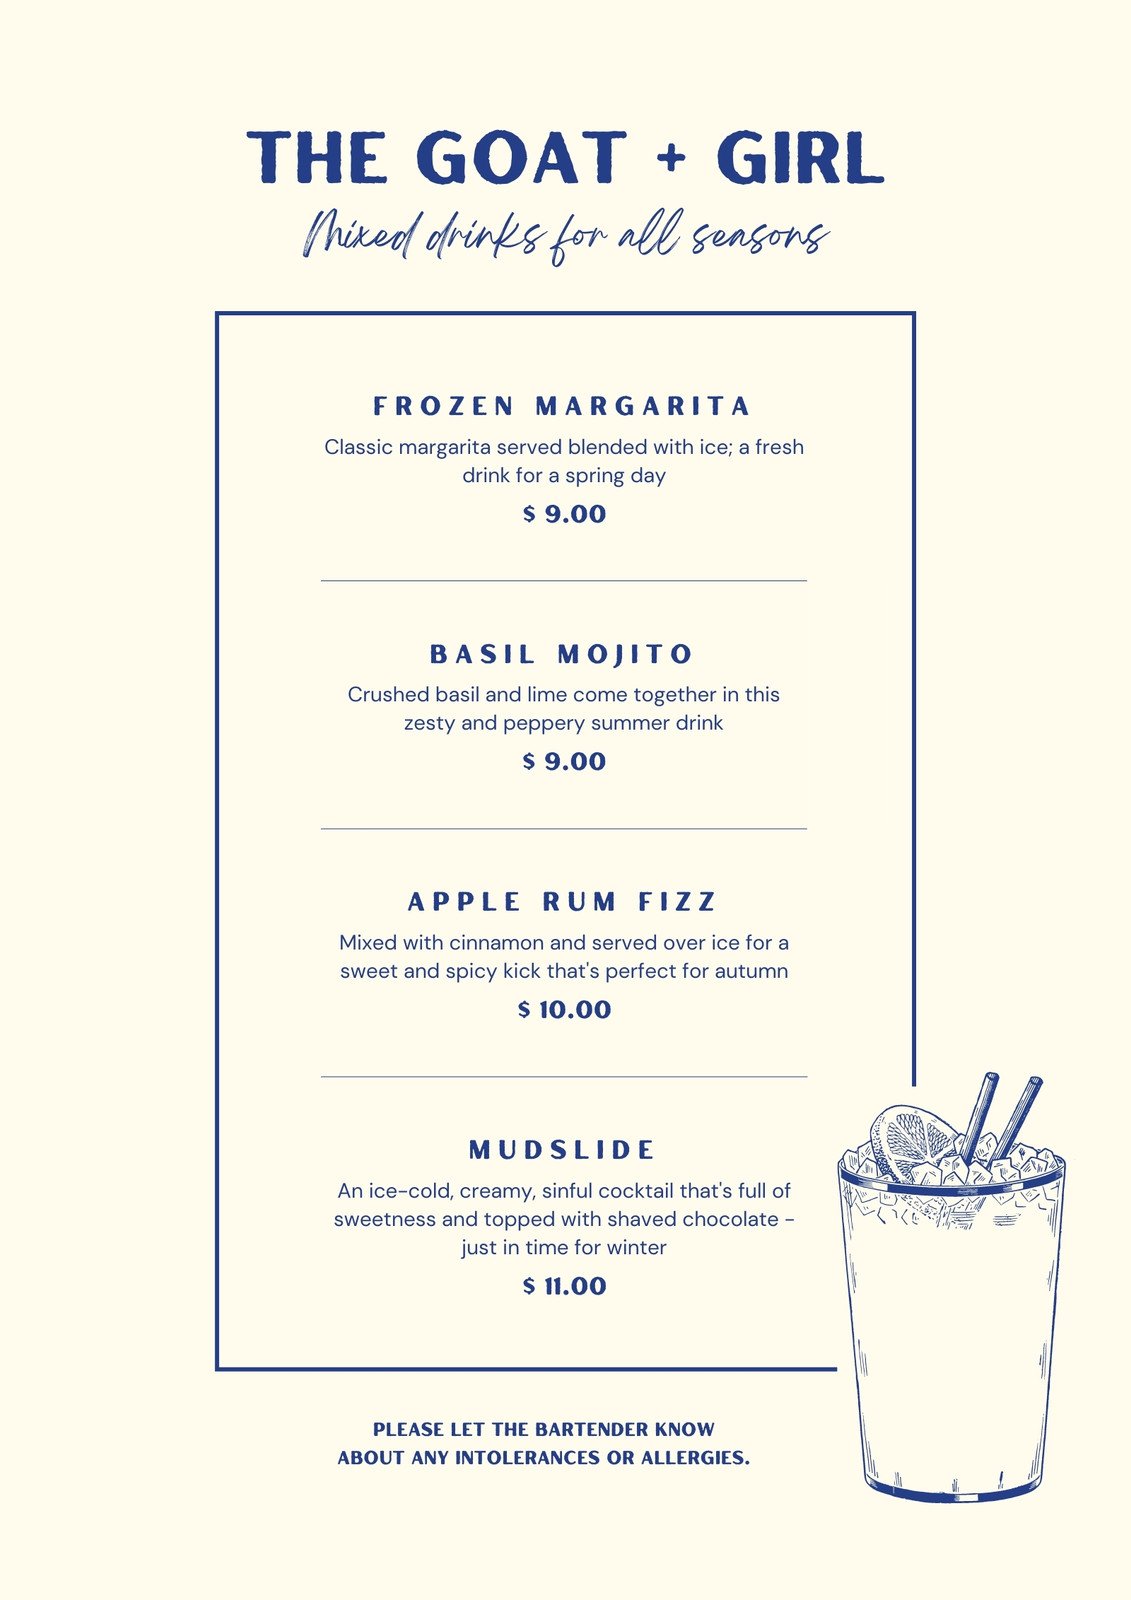 https://marketplace.canva.com/EAE4kQmLlYw/1/0/1131w/canva-light-yellow-and-blue-rustic-illustrated-general-cocktail-menu-0vX-GOEOS3M.jpg